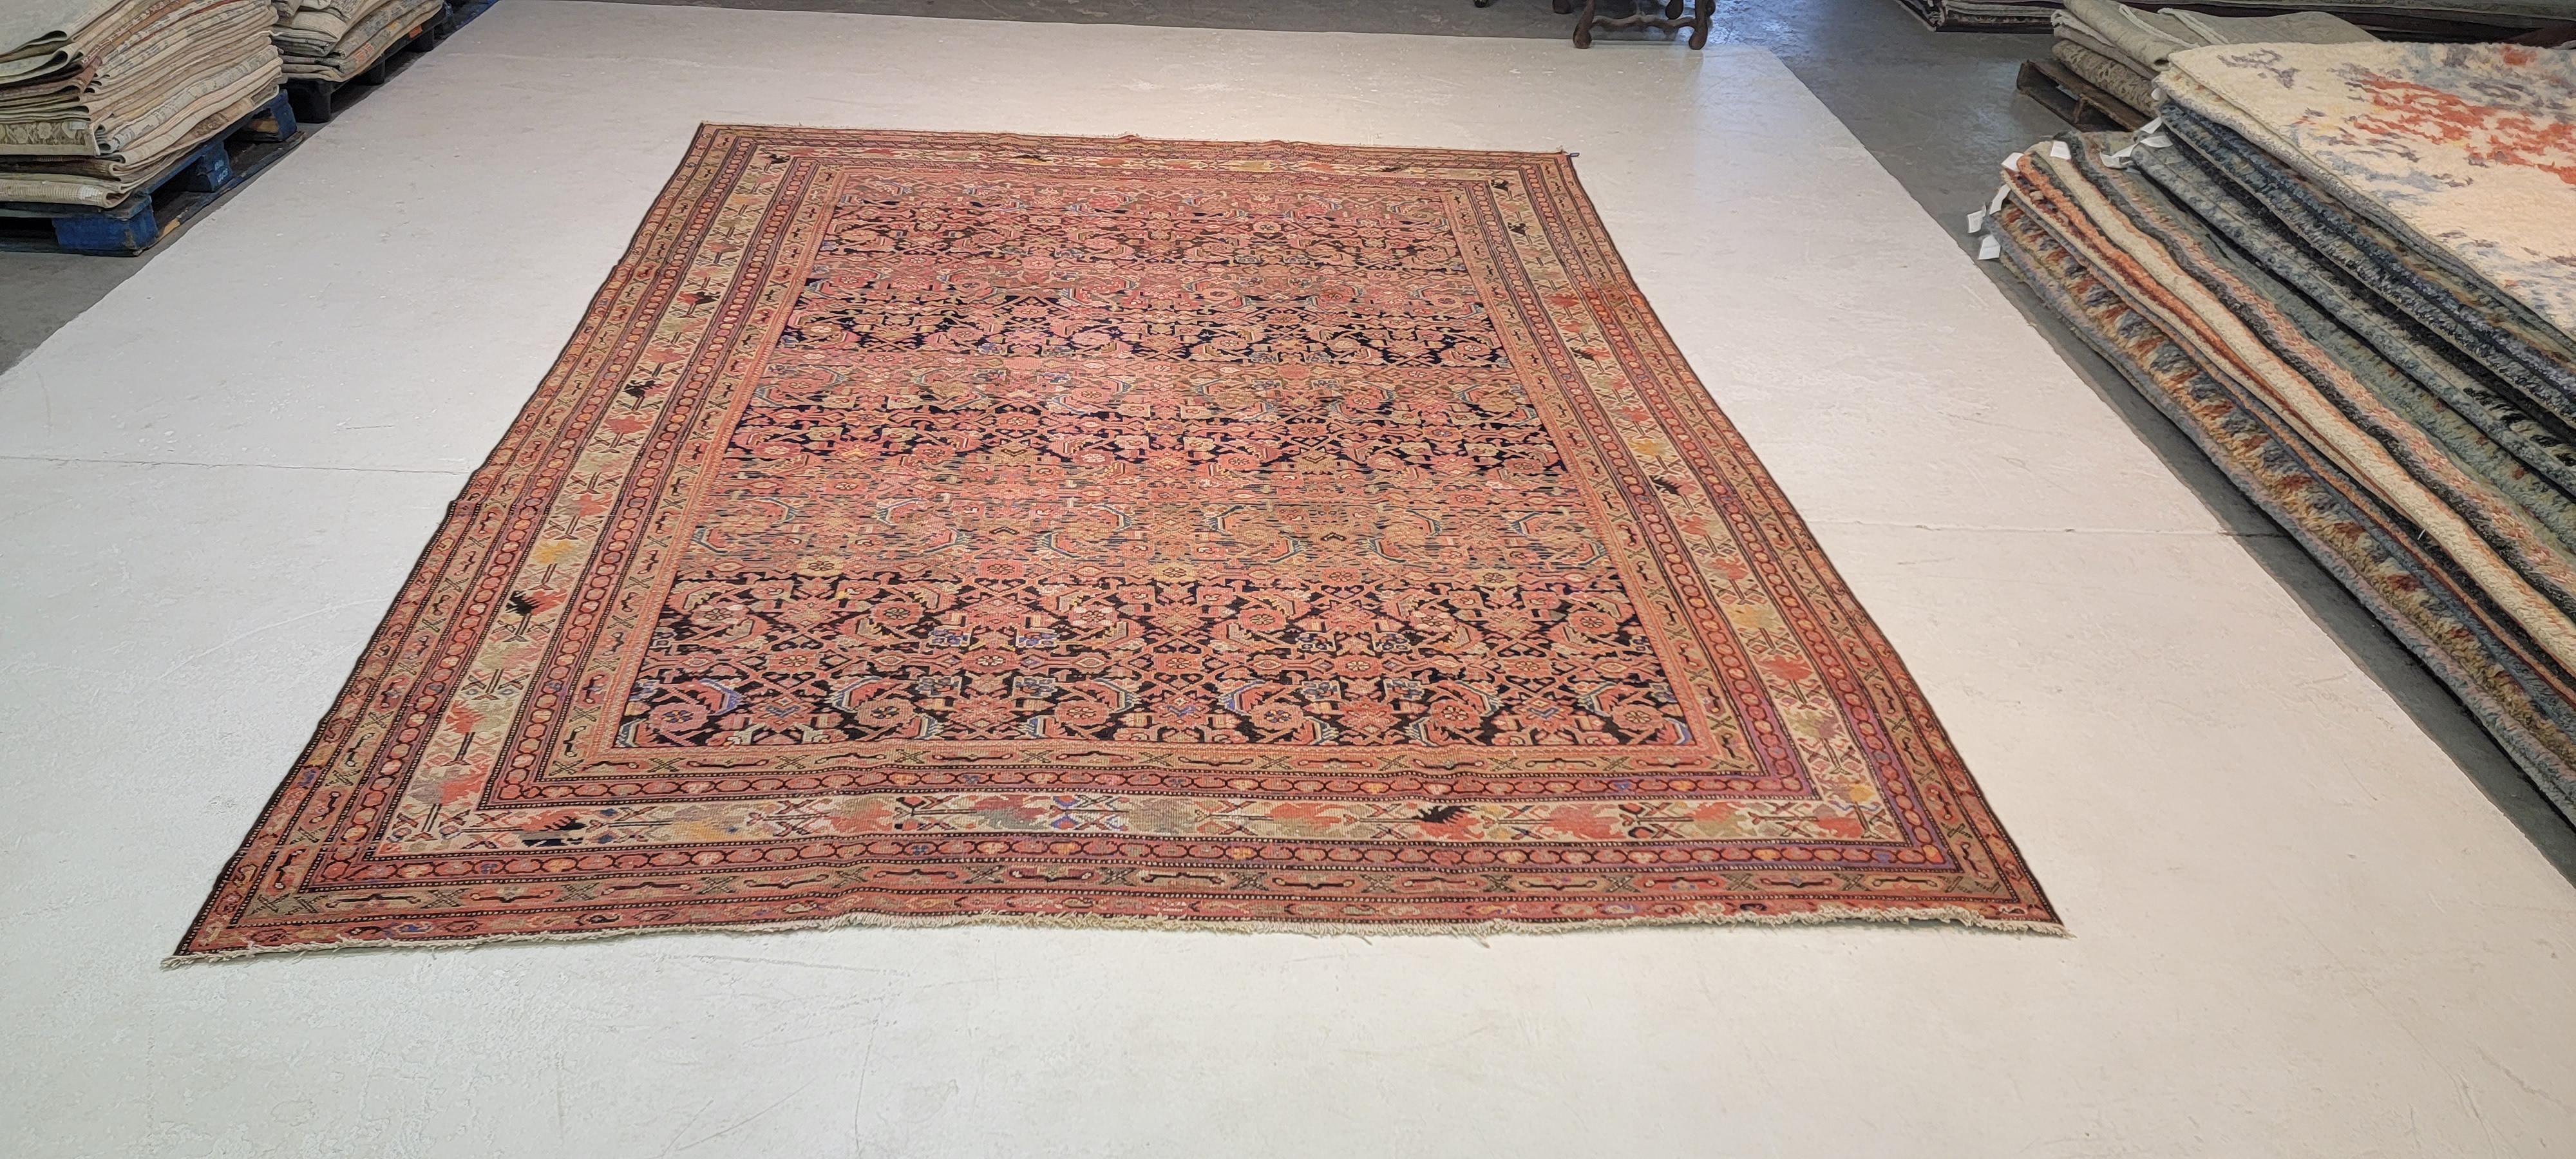 Traditional all over Herati design with Patina and decorative abrash. Very unique in size for Malayer.

Size: 9'9